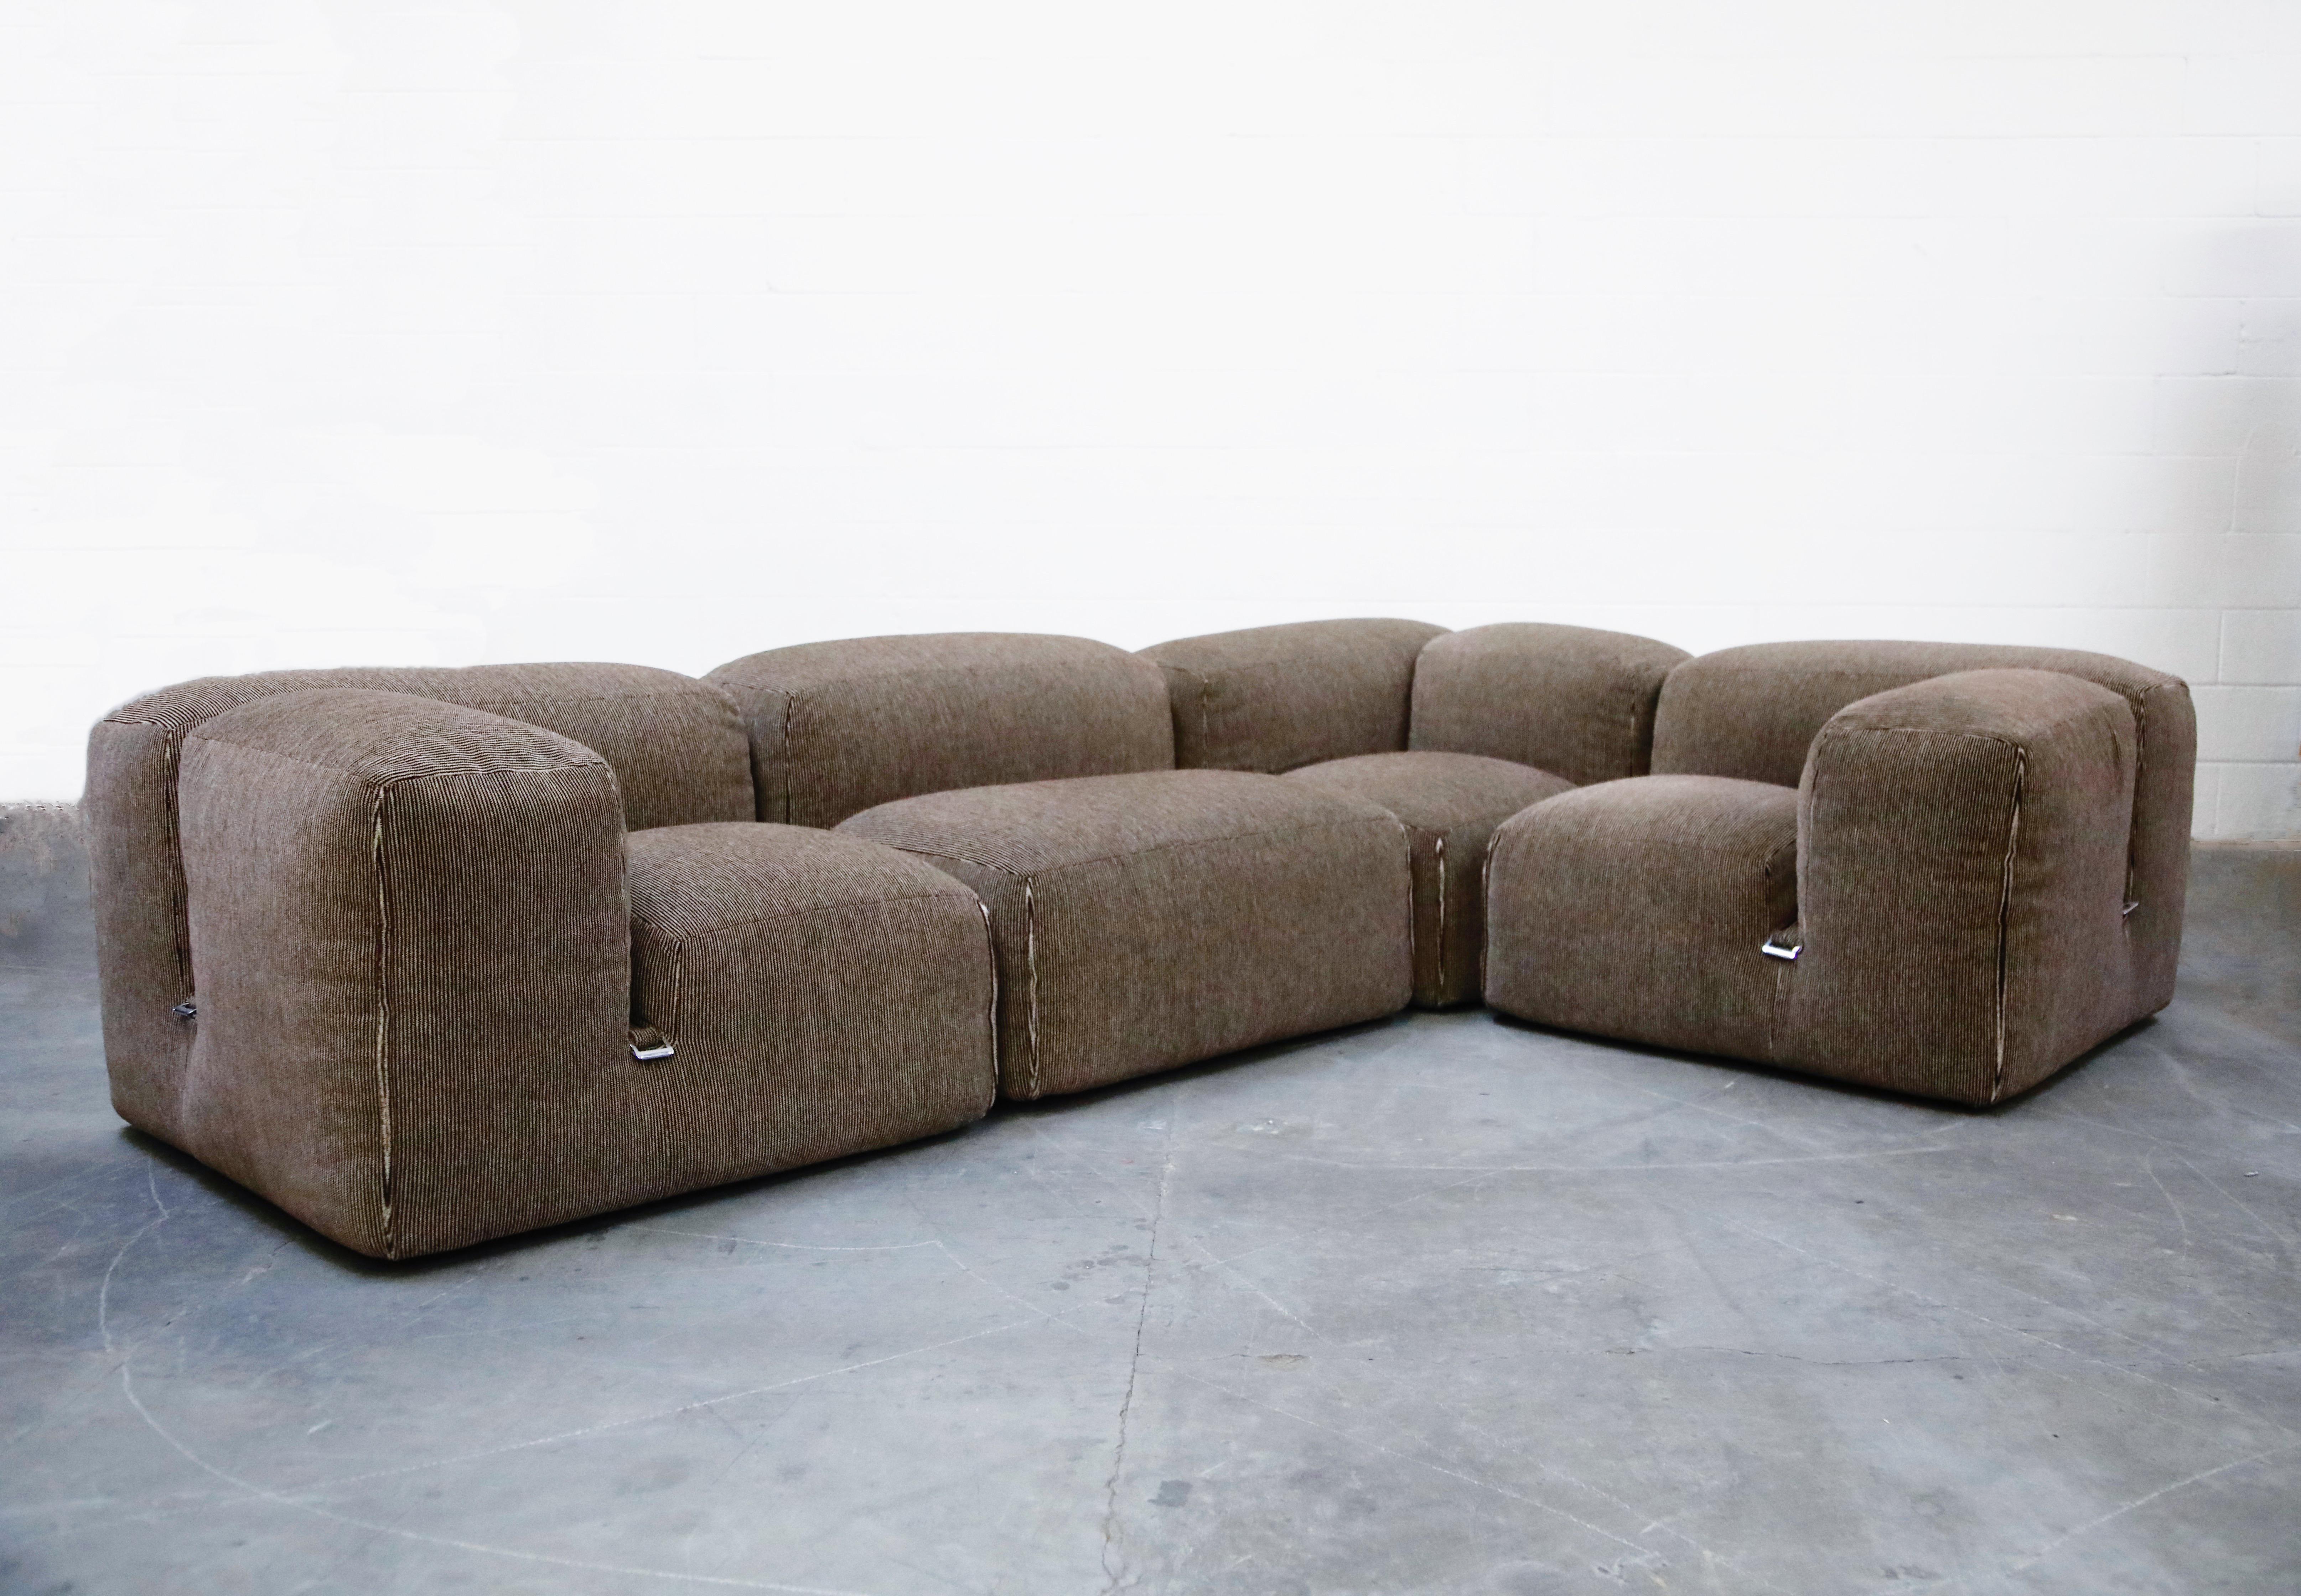 Mario Bellini for Cassina modular 'Le Mura' four-piece sectional sofa in mohair, signed with Cassina and Atelier International labels. Consists of 3 corner sections and one middle section. All chrome buckles are present and complete. 

This sofa